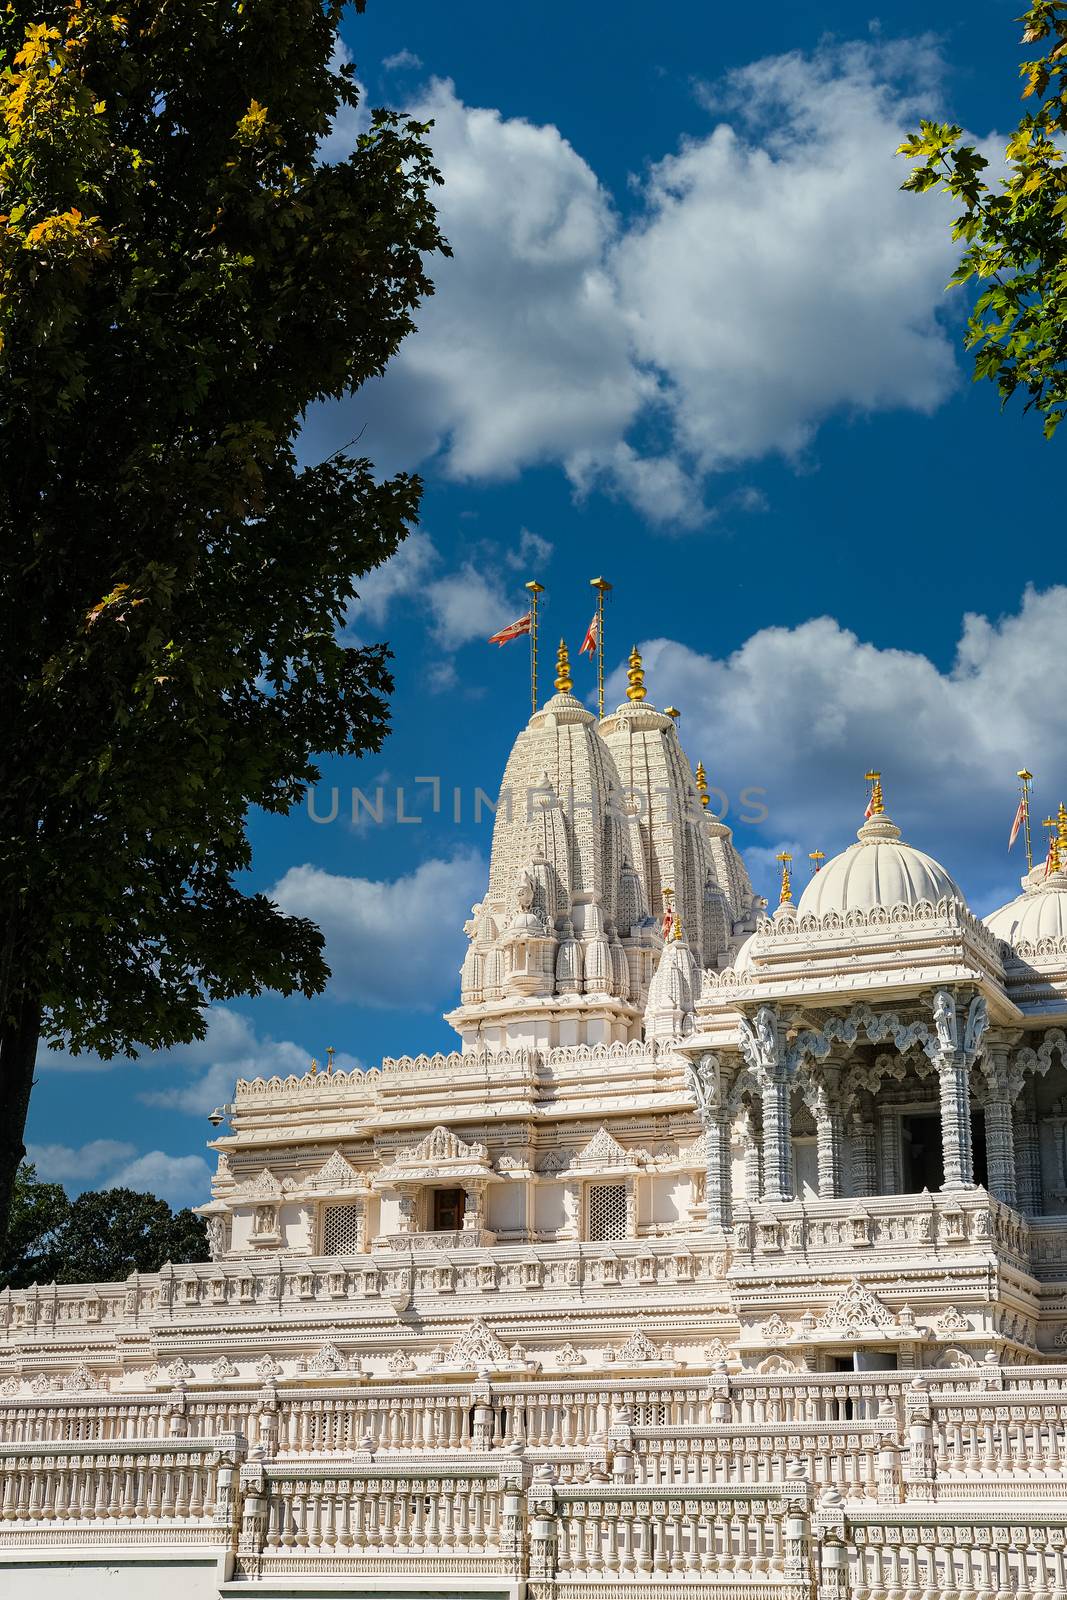 View of a white marble hindu temple